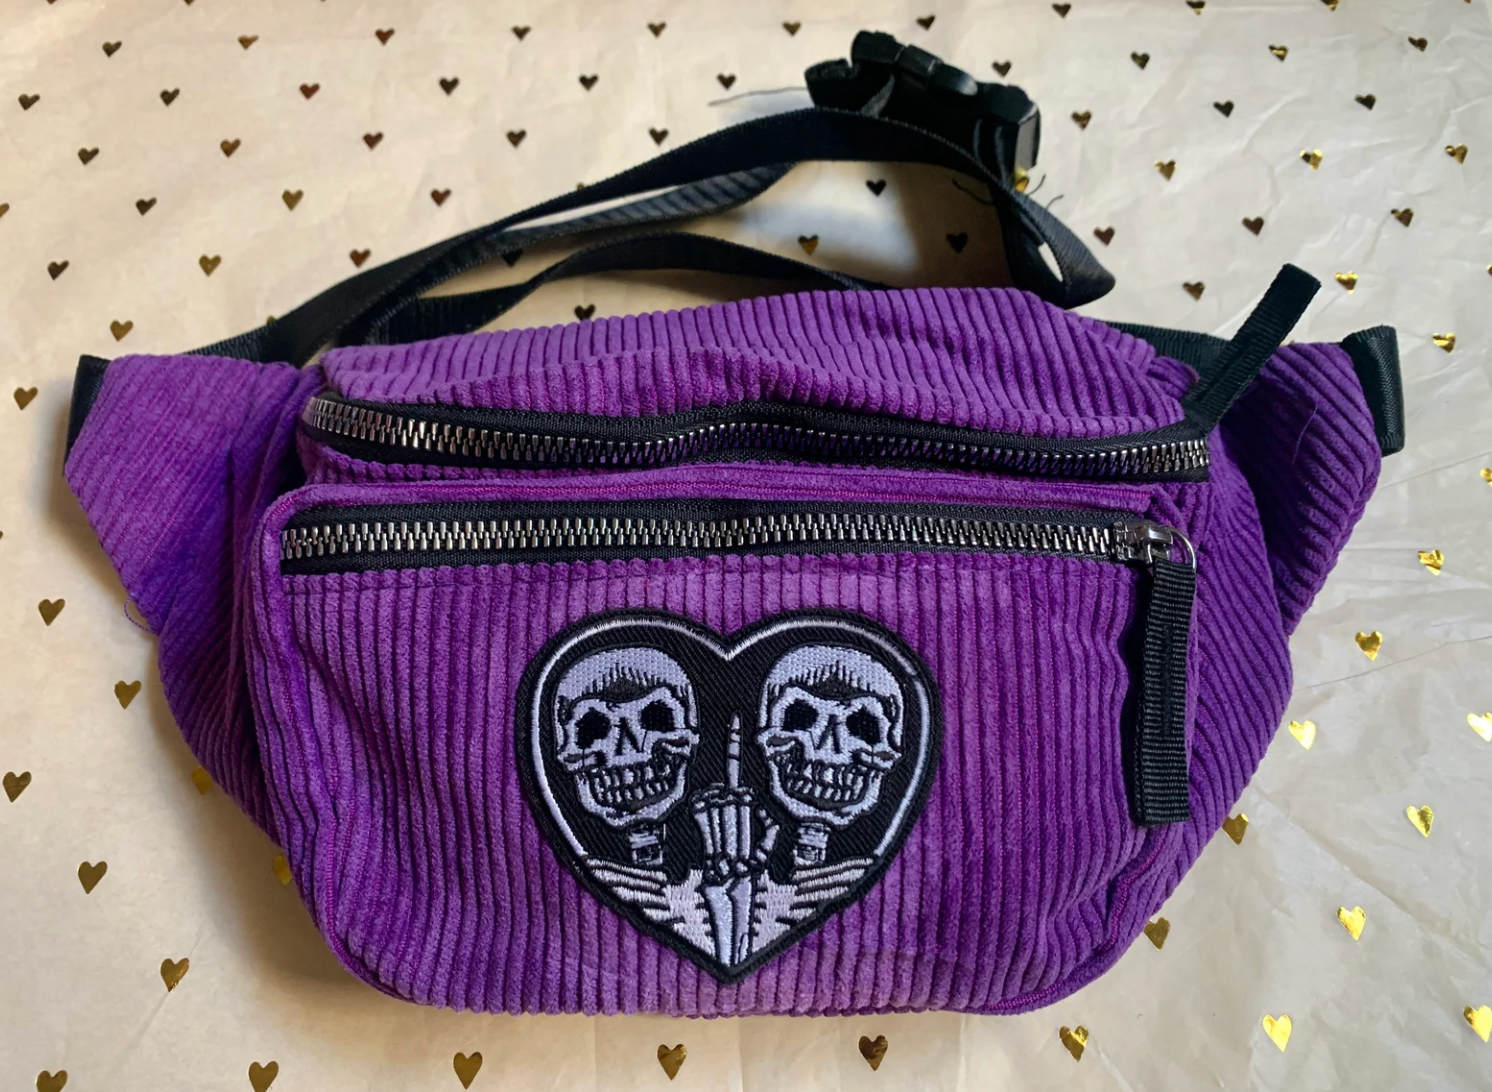 Purple corduroy fanny pack with two zippers and heart-shaped patch with two skeletons on it 